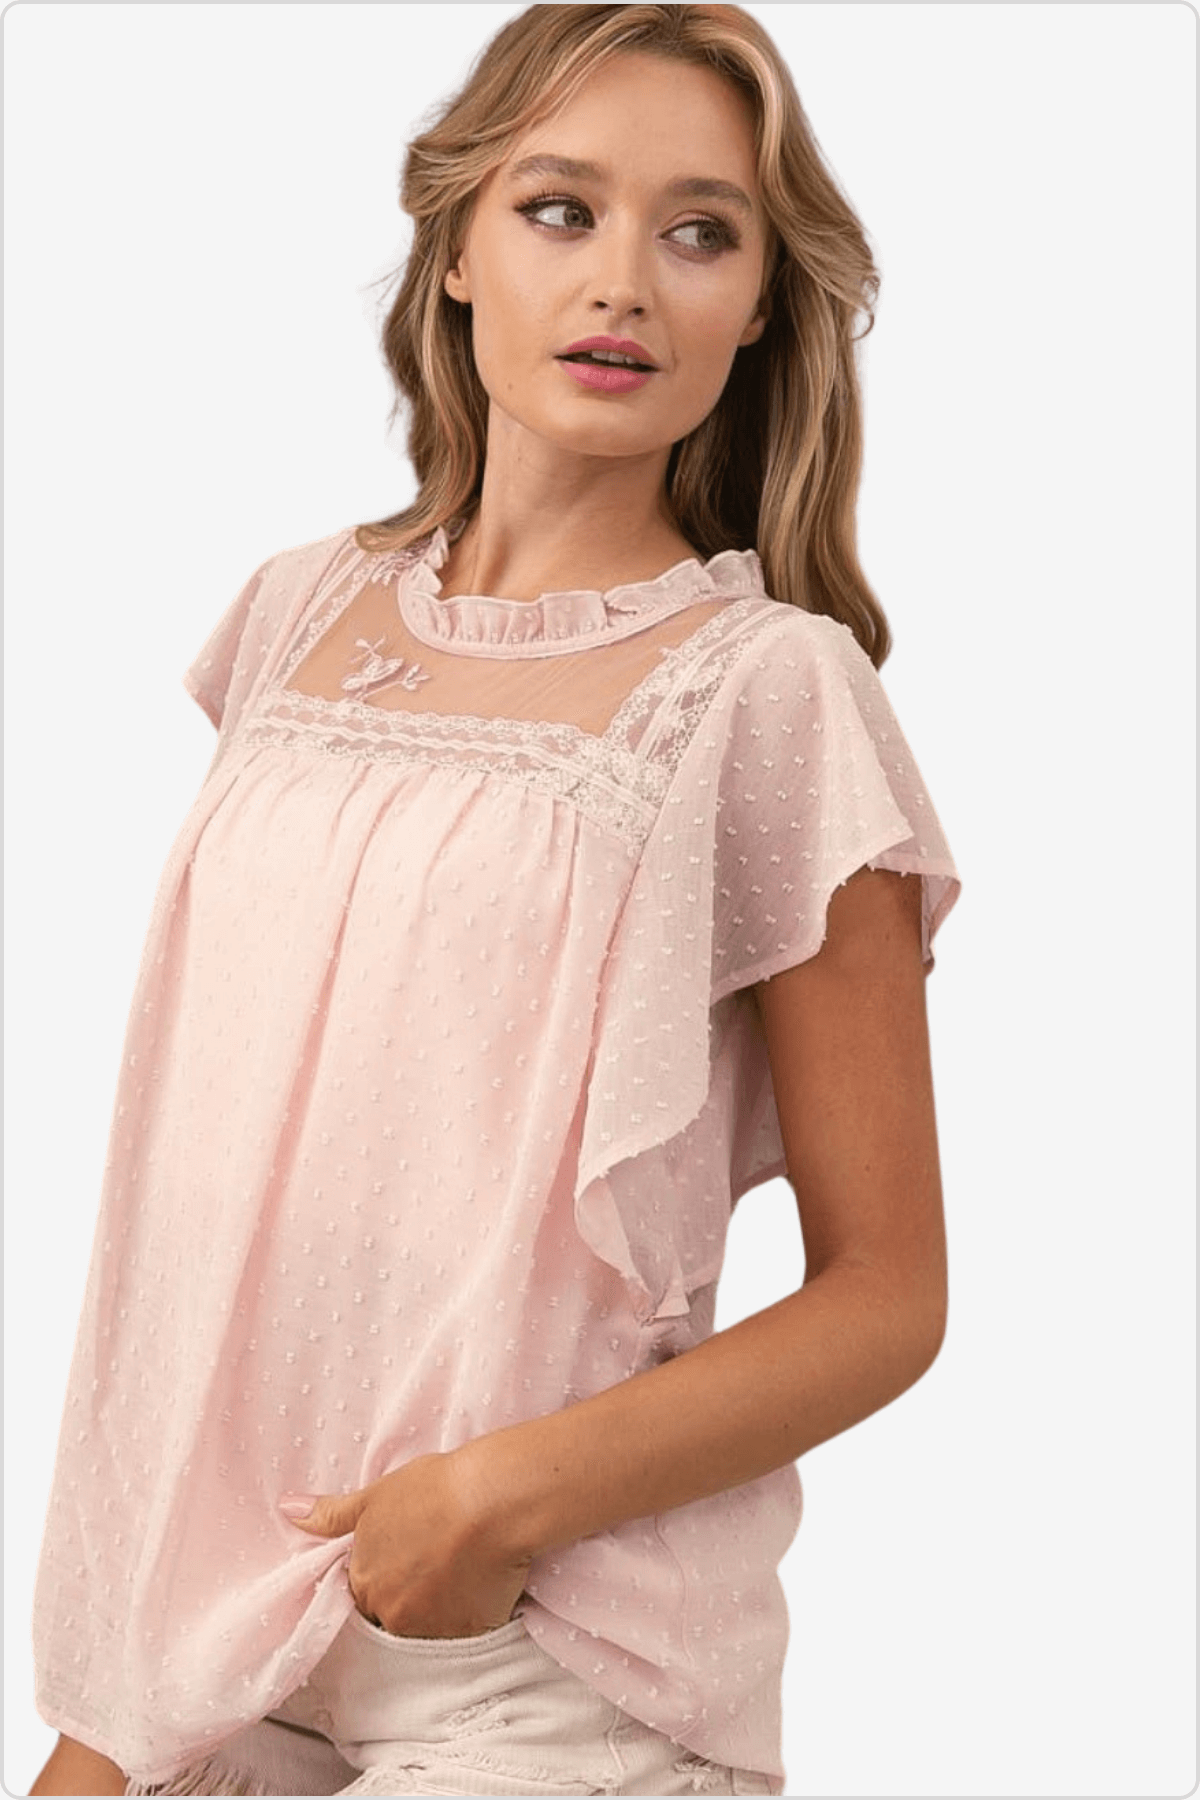 Woman in a soft pink blouse with delicate lace detailing and flutter sleeves.